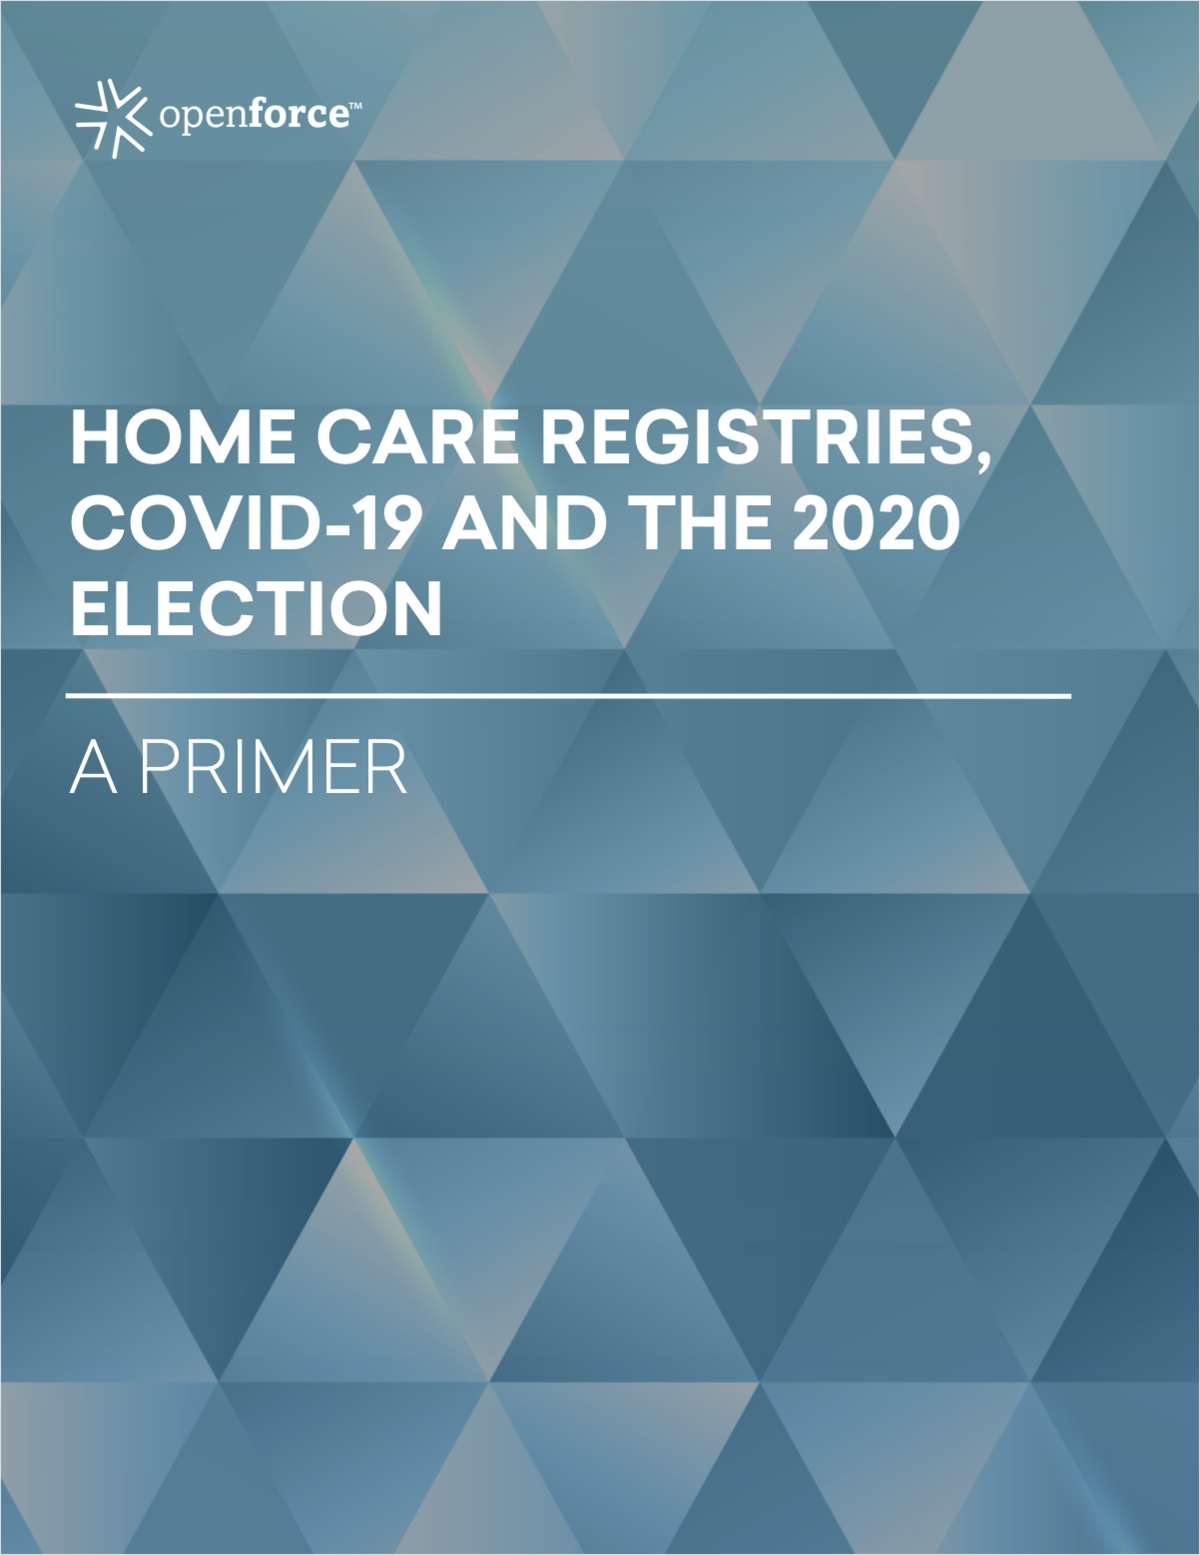 Home care registries, COVID-19 and the 2020 election: A primer